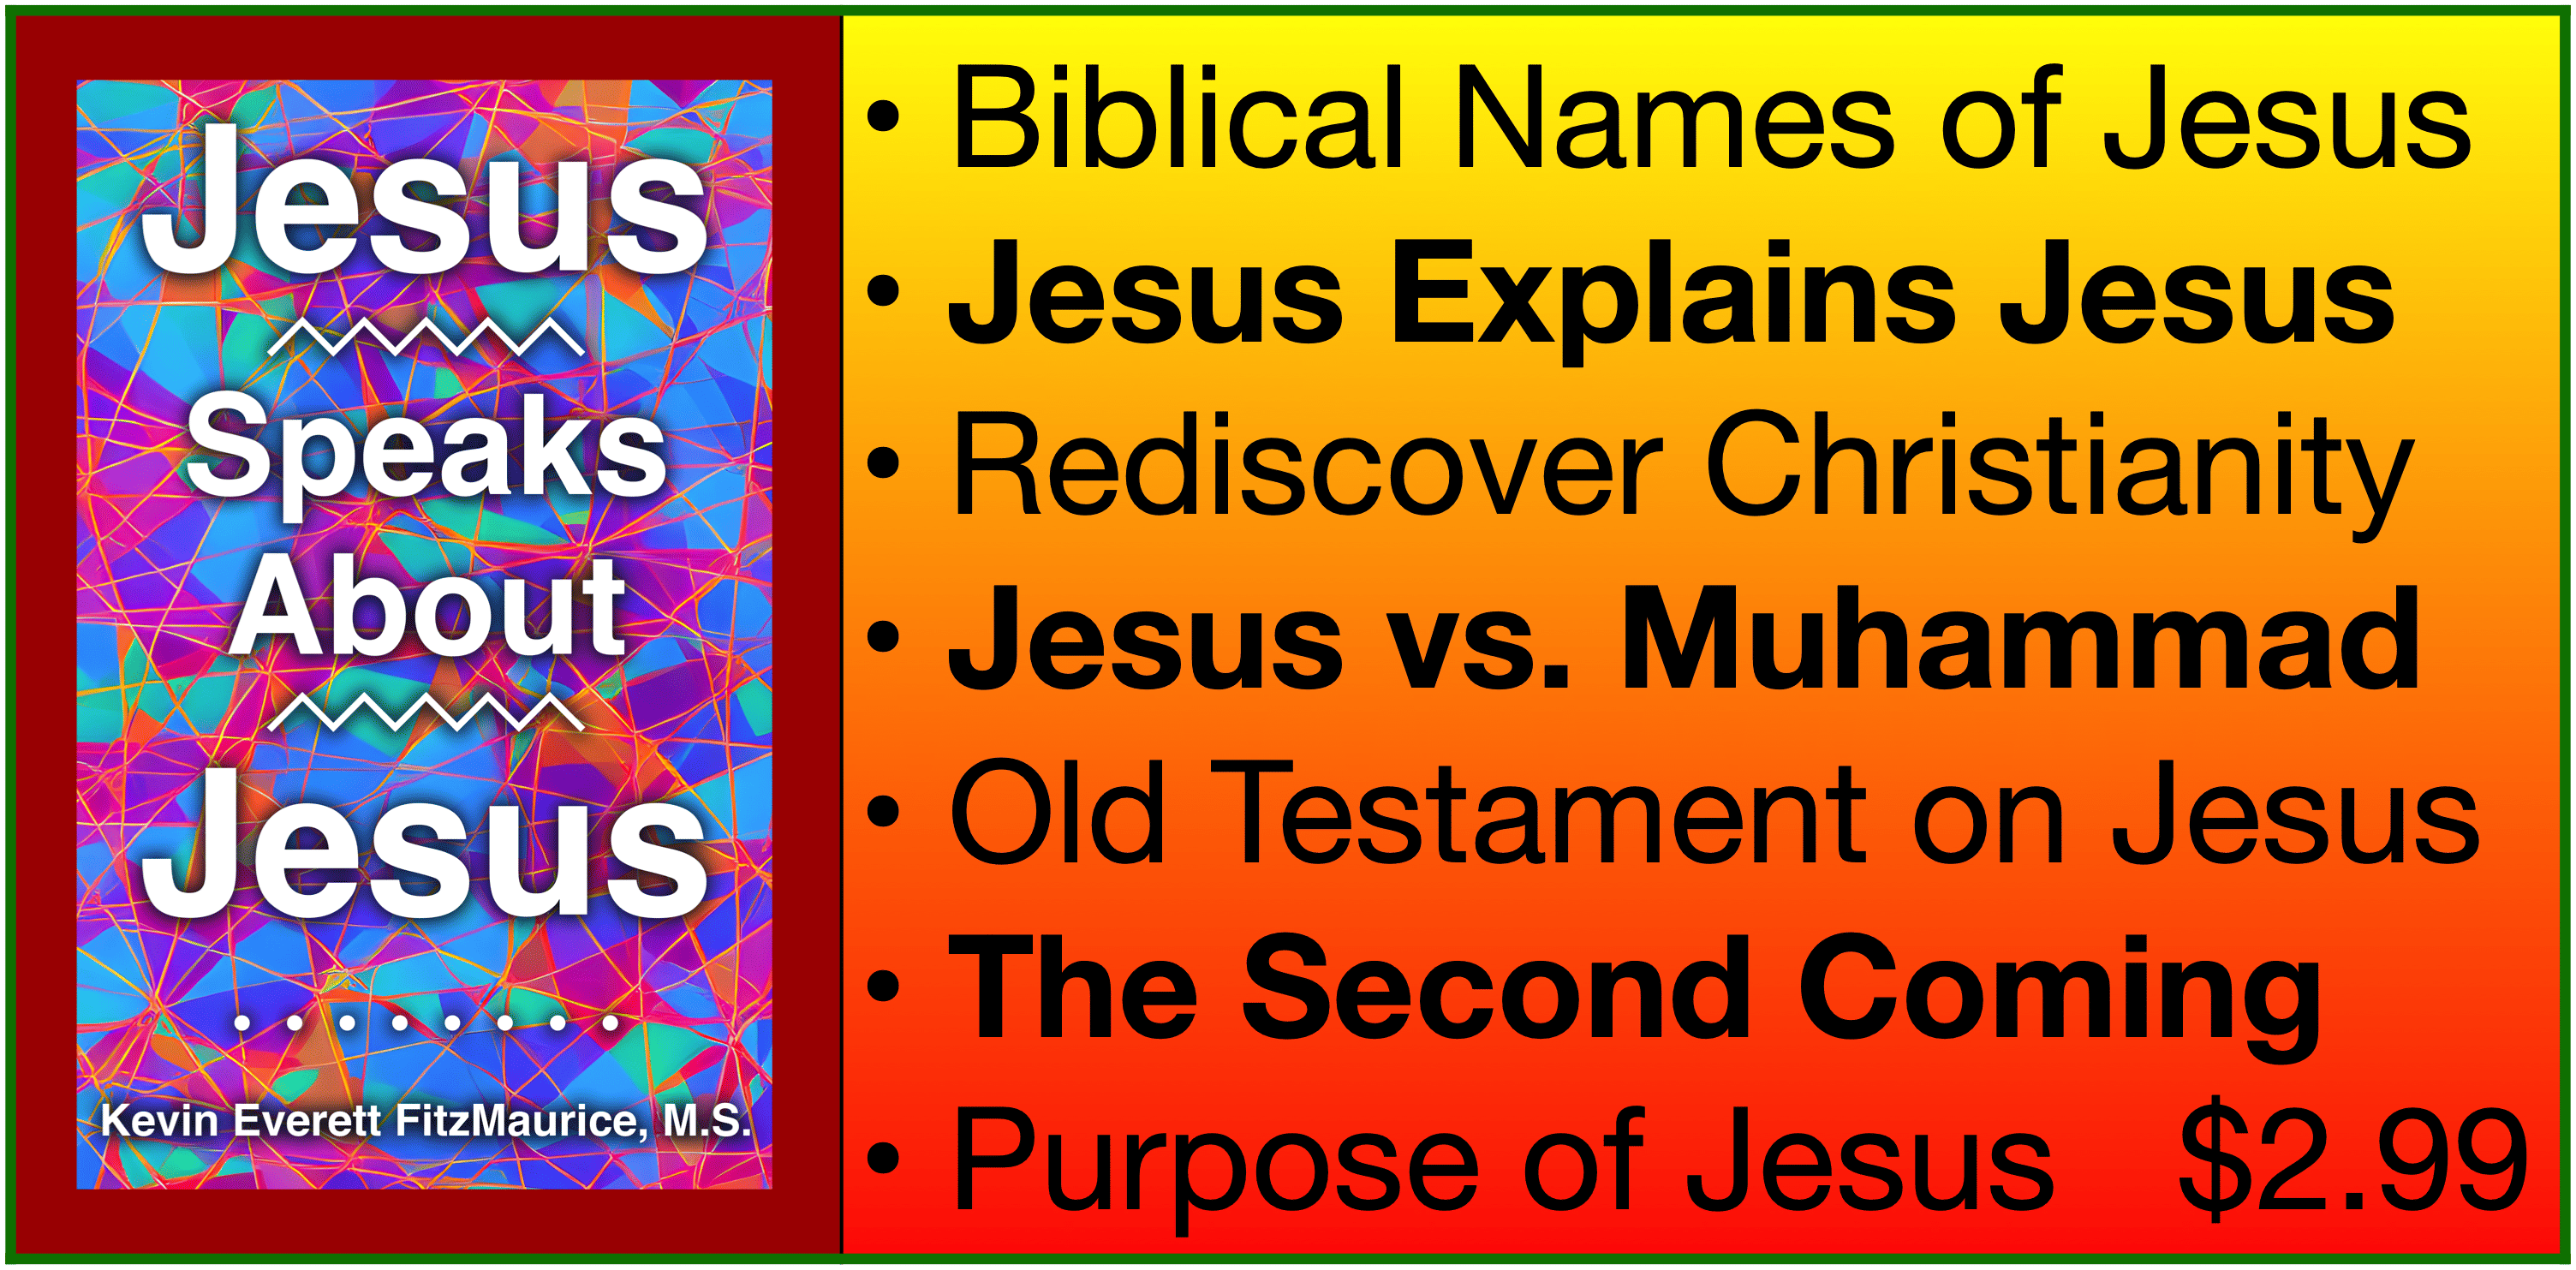 Jesus Speaks About Jesus Contents and book information.